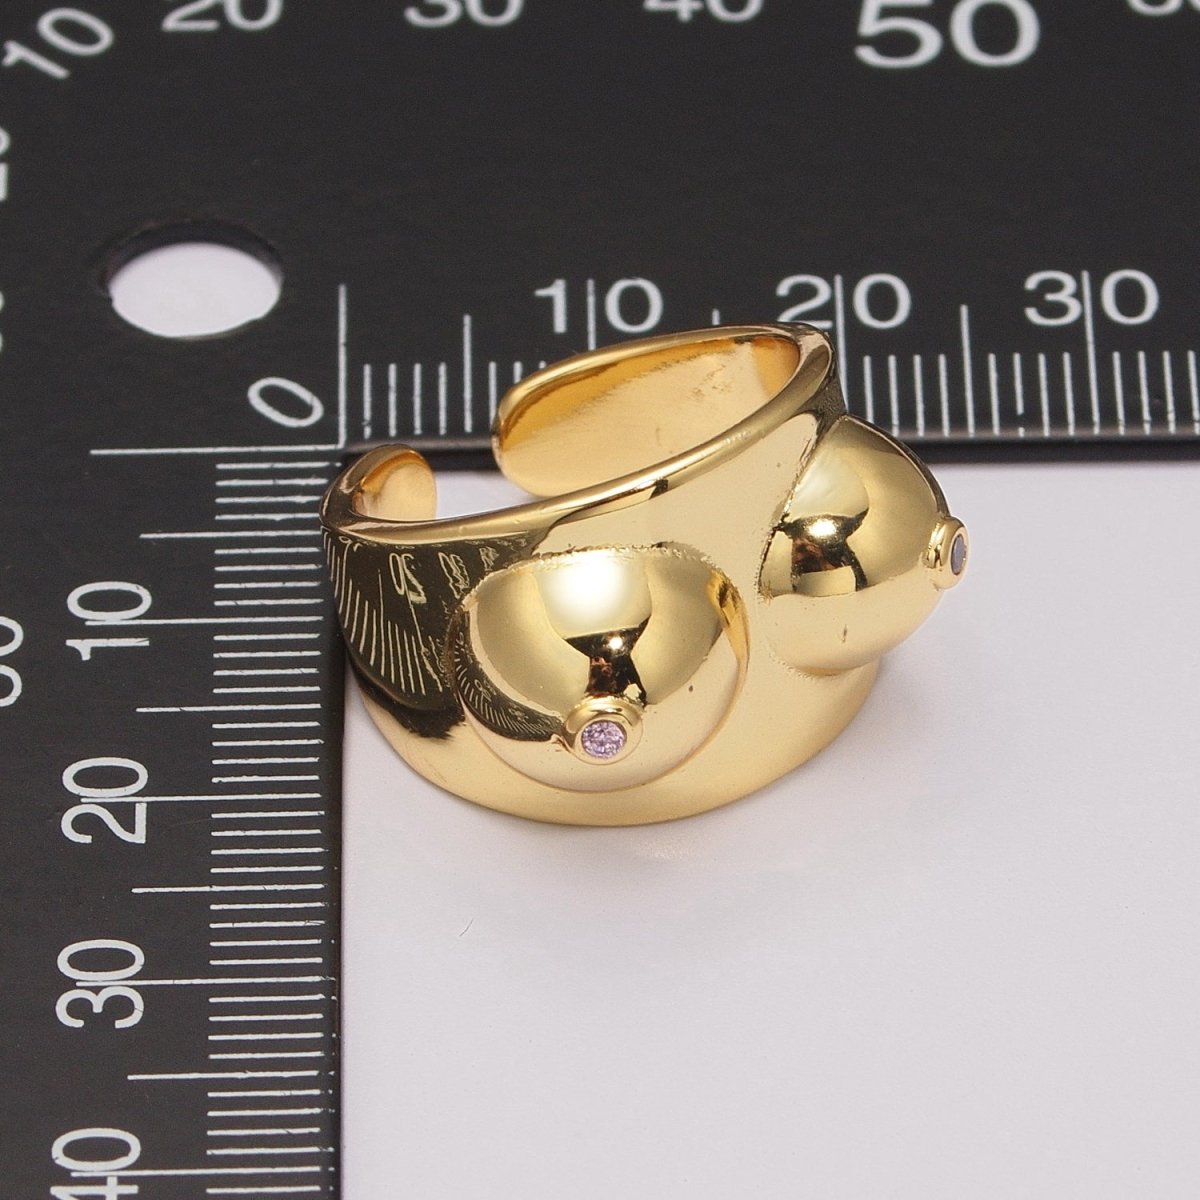 Gold Boobs Ring Novelty Silver Breast Cancer Awareness. Celebrating Breastfeeding Jewelry Gold Boobs Ring Novelty Silver Breast Cancer Awareness. Celebrating Breastfeeding Jewelry U-025 U-026 - DLUXCA